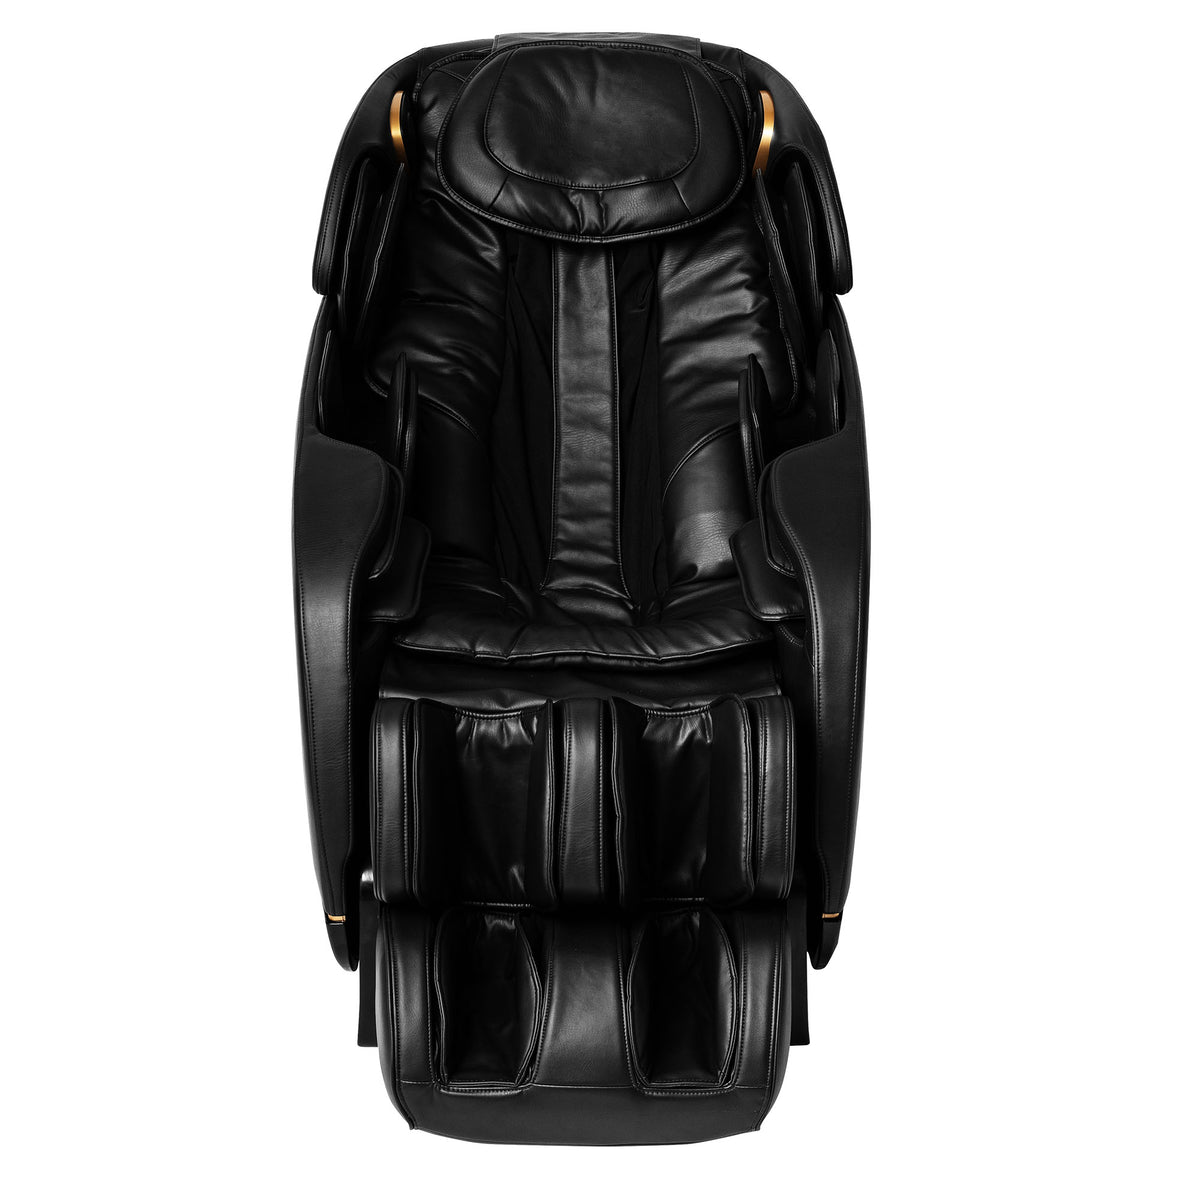 Detailed view of the black leather upholstery on Inner Balance Wellness Jin 2.0 Massage Chair